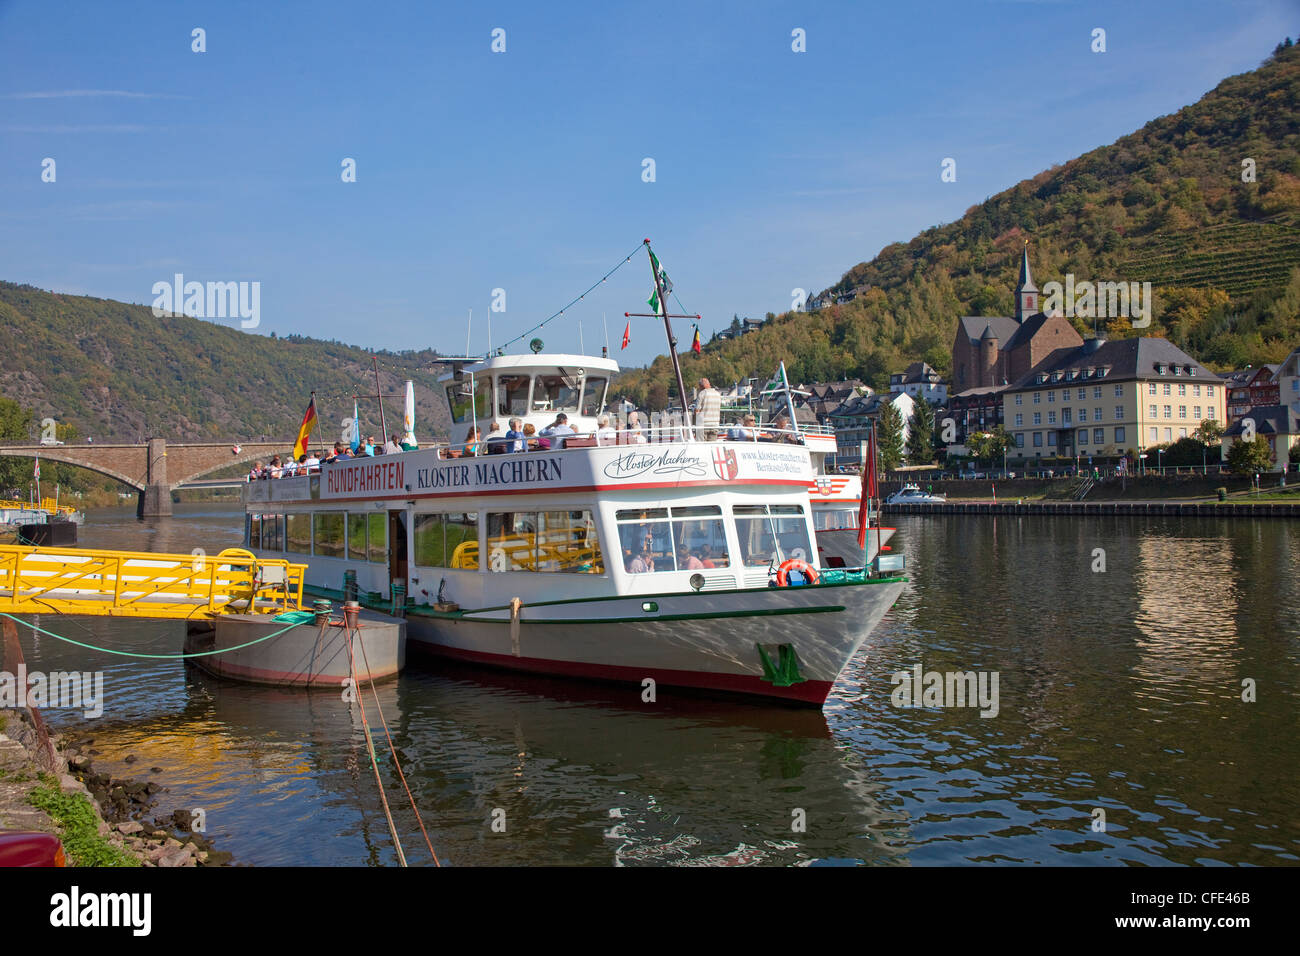 Moselle excursion ship at landing stage, sightseeing tours on Moselle river, Cochem, Rhineland-Palatinate, Germany, Europe Stock Photo